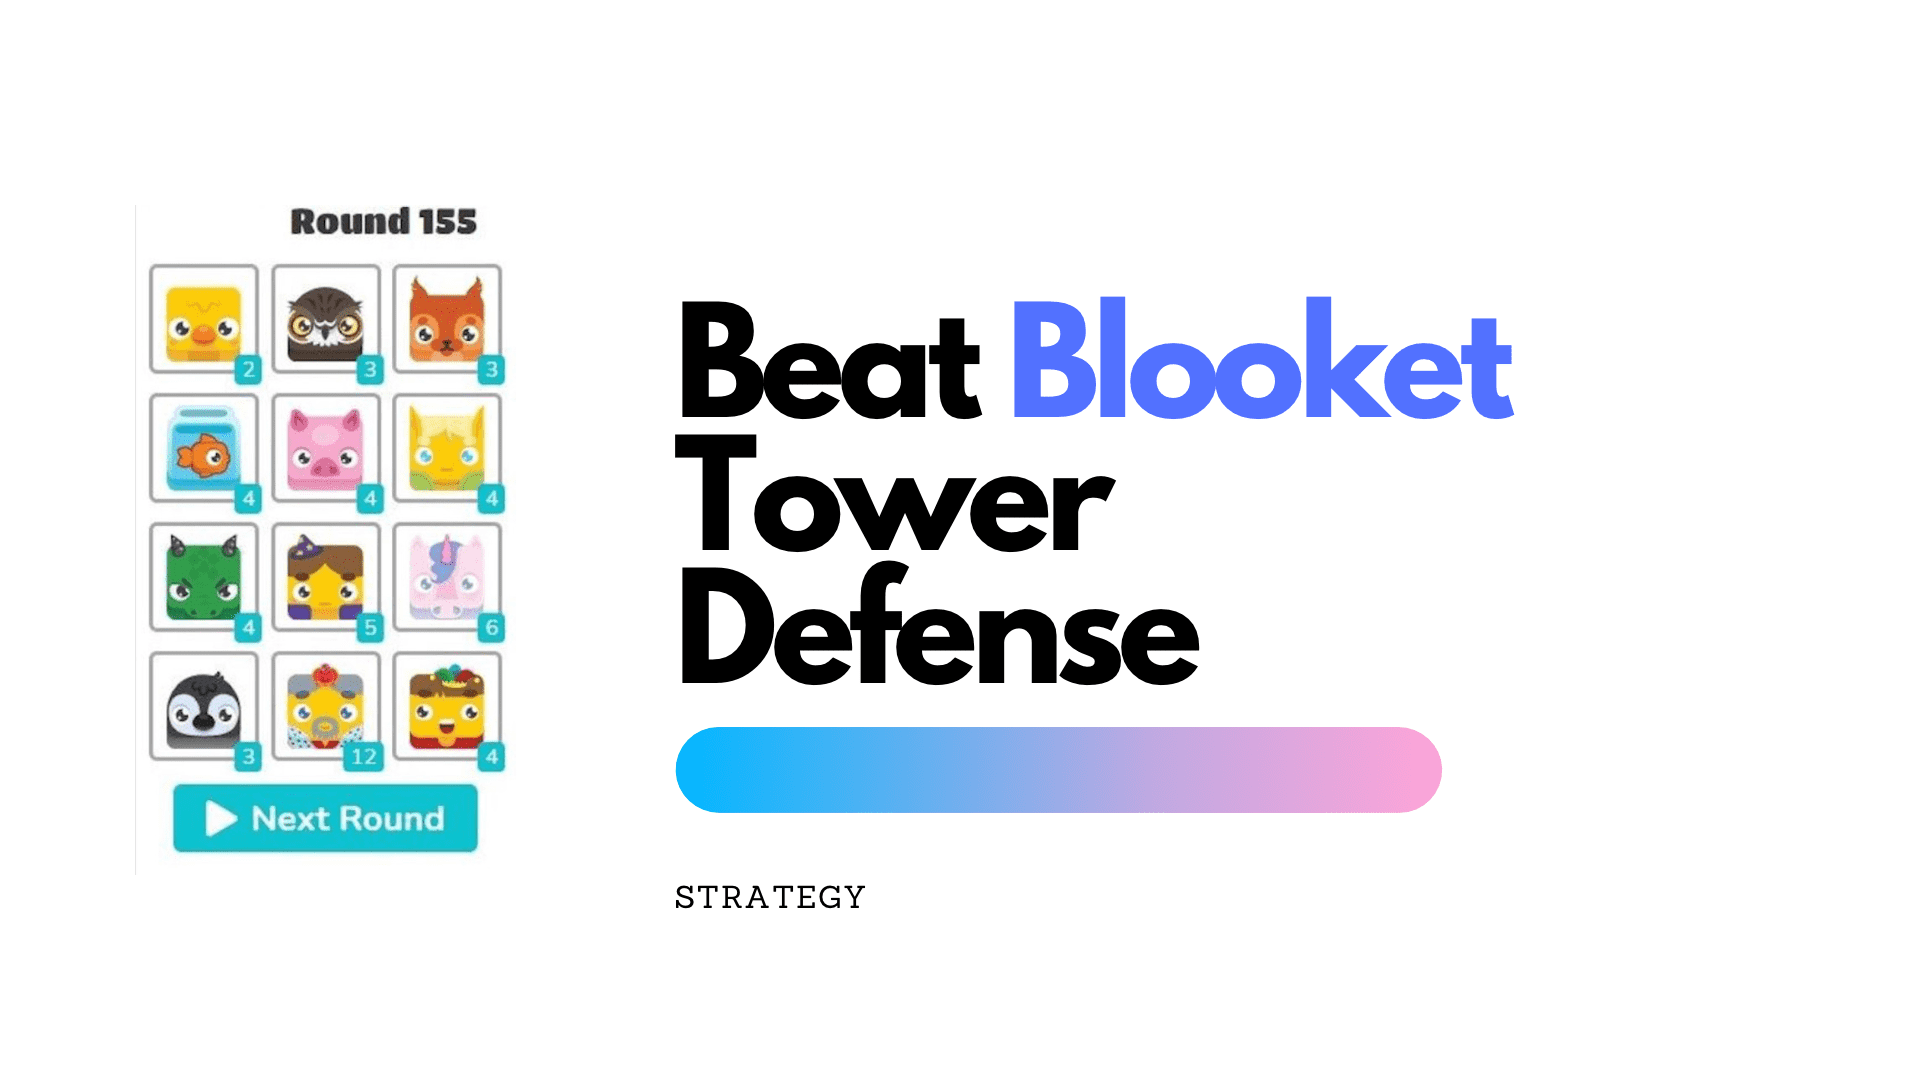 Playing Tower Defense 2 in blooket 